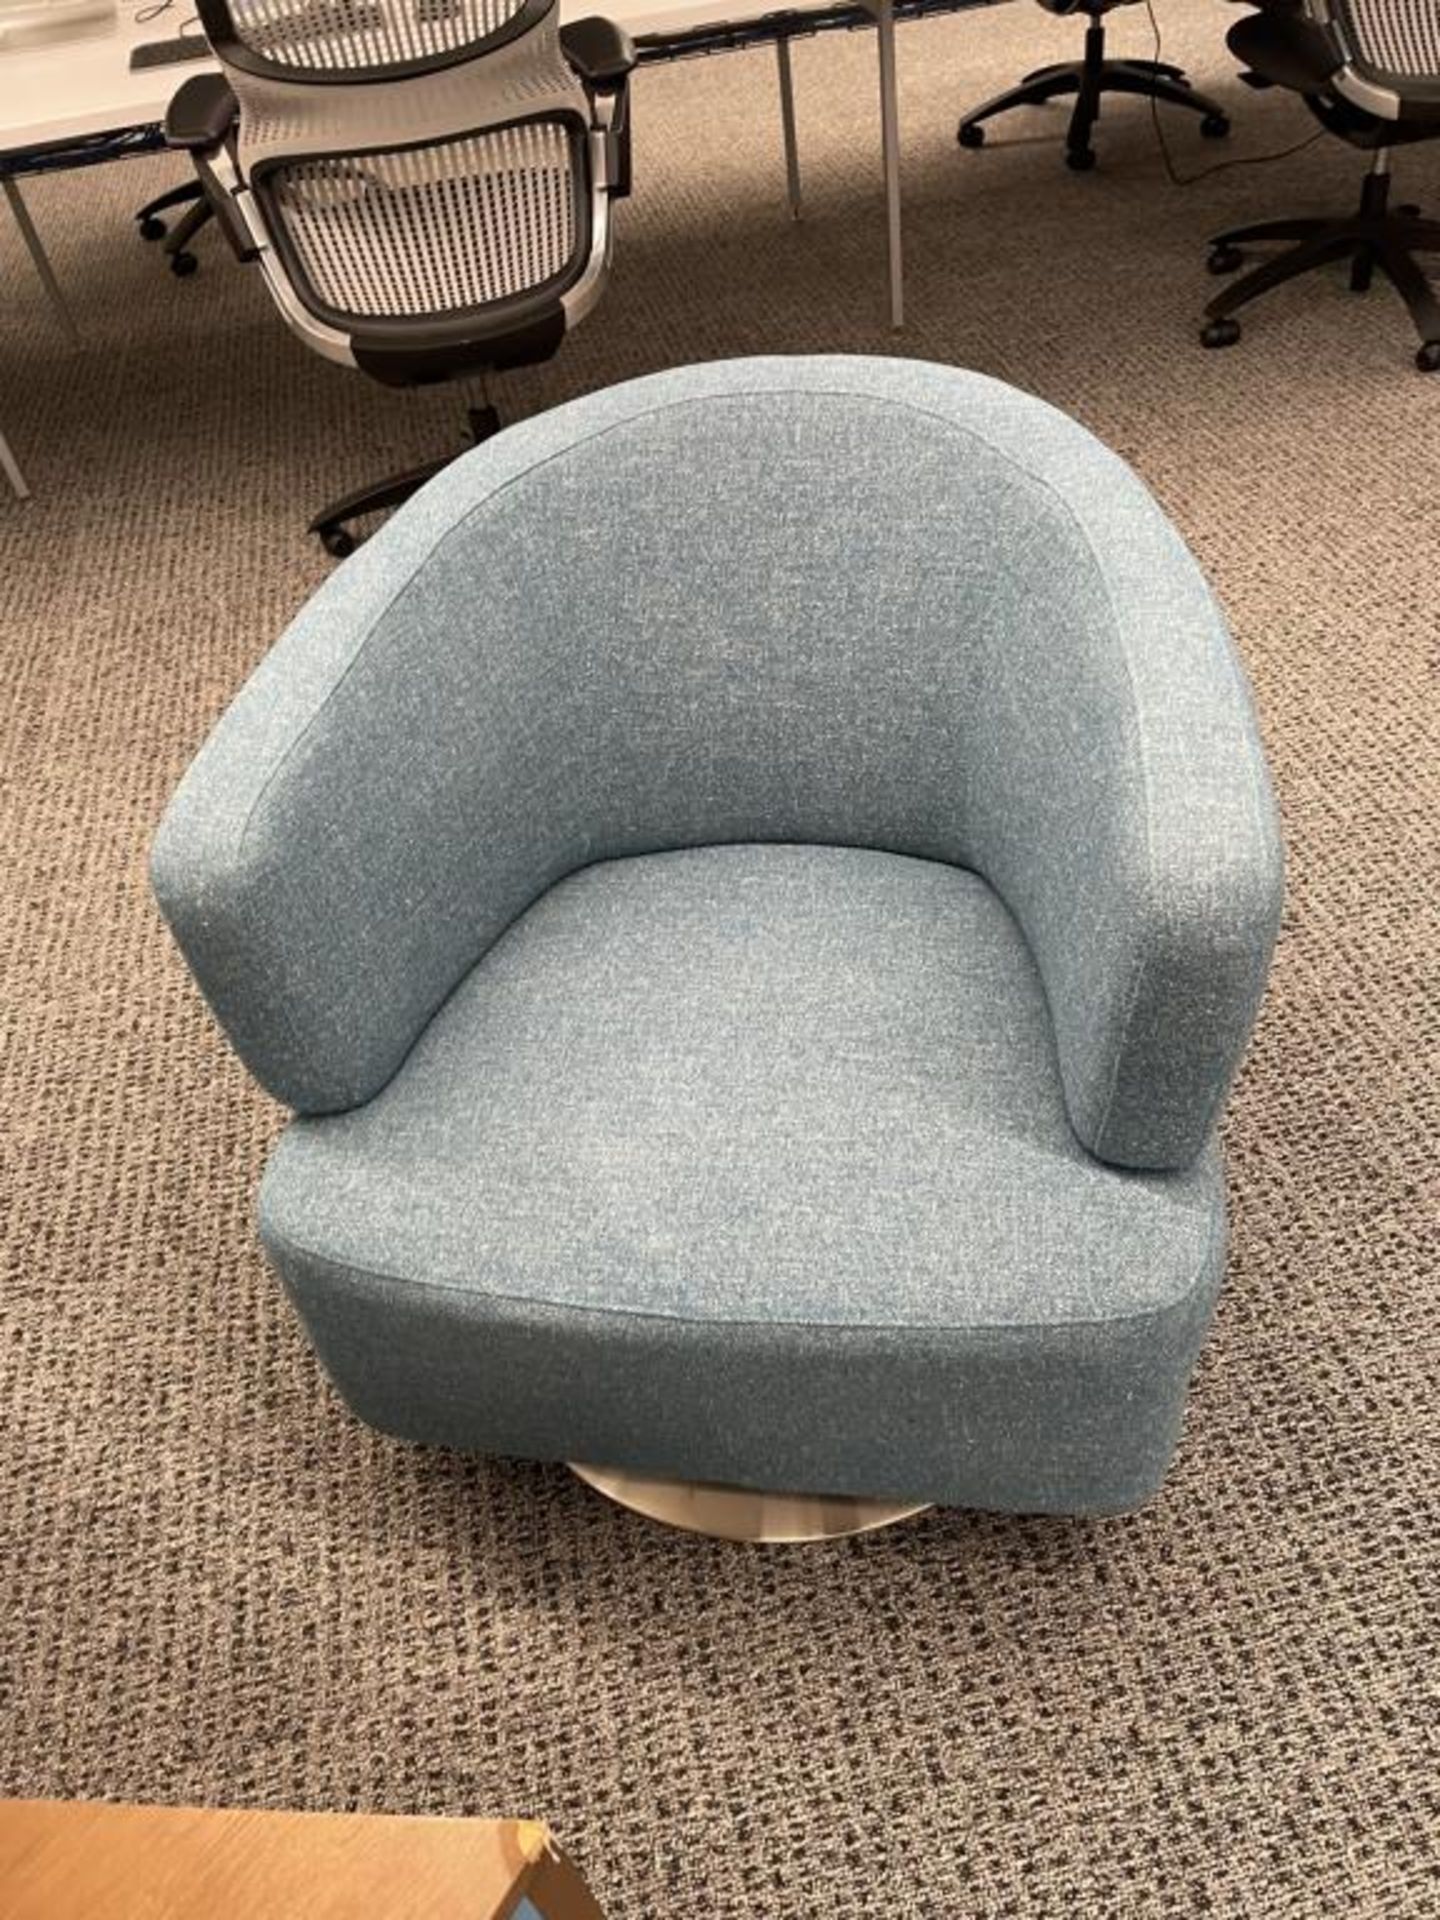 (3qty) Jason Furniture Teal Swivel Chairs - Image 9 of 9